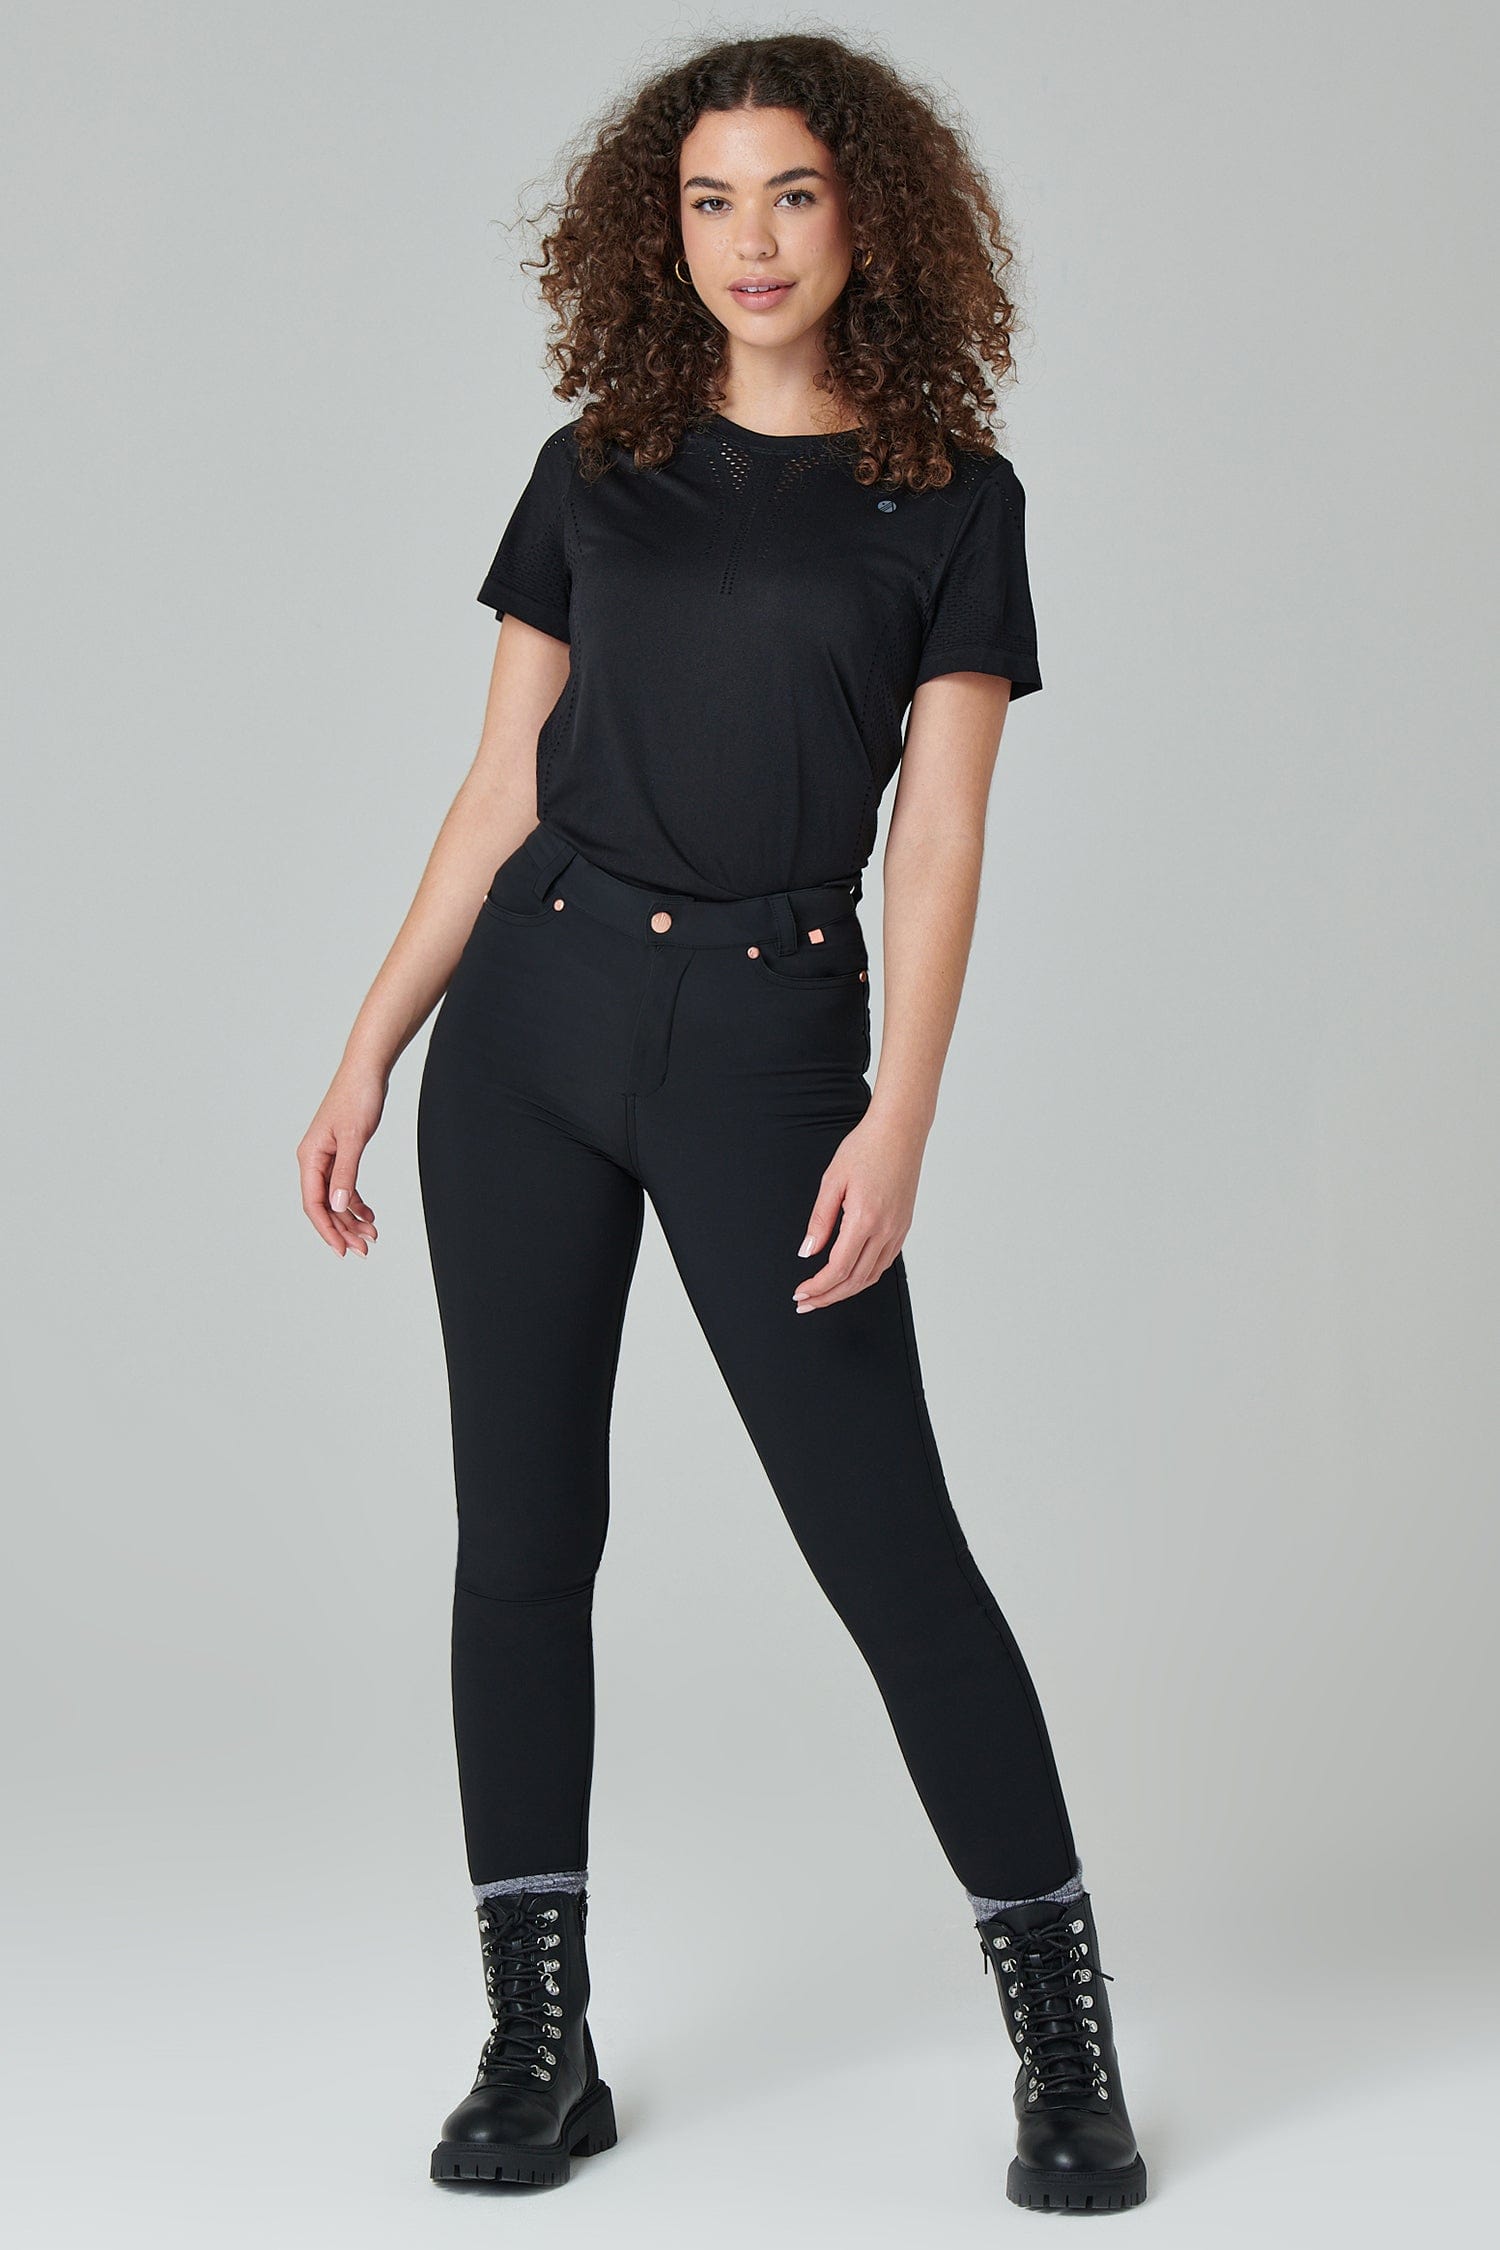 Buy AND Black Women Skinny Fit Formal Trousers | Shoppers Stop